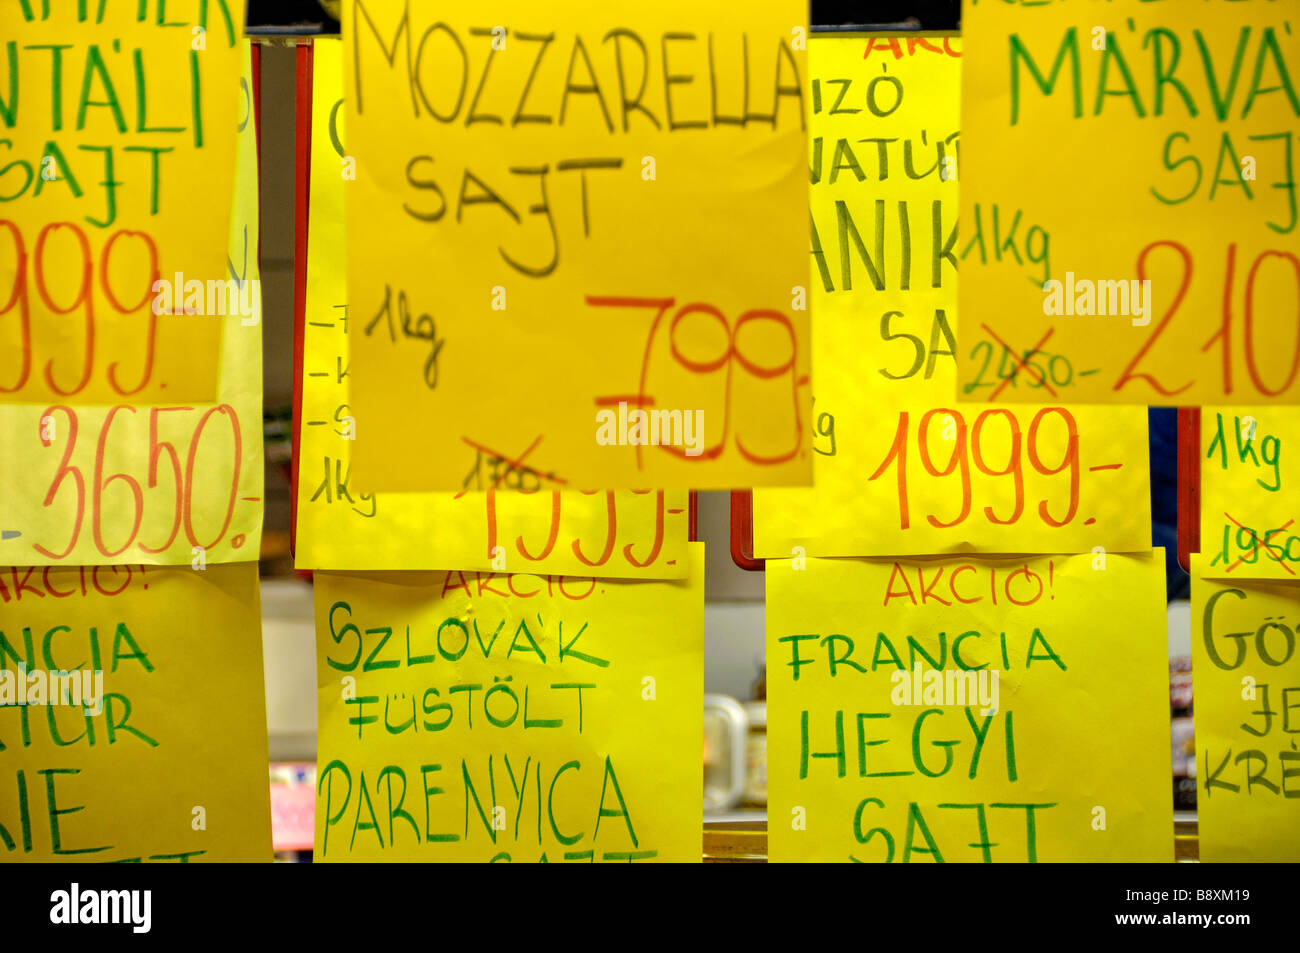 Price tags at the Central Market Hall, Budapest, Hungary Stock Photo